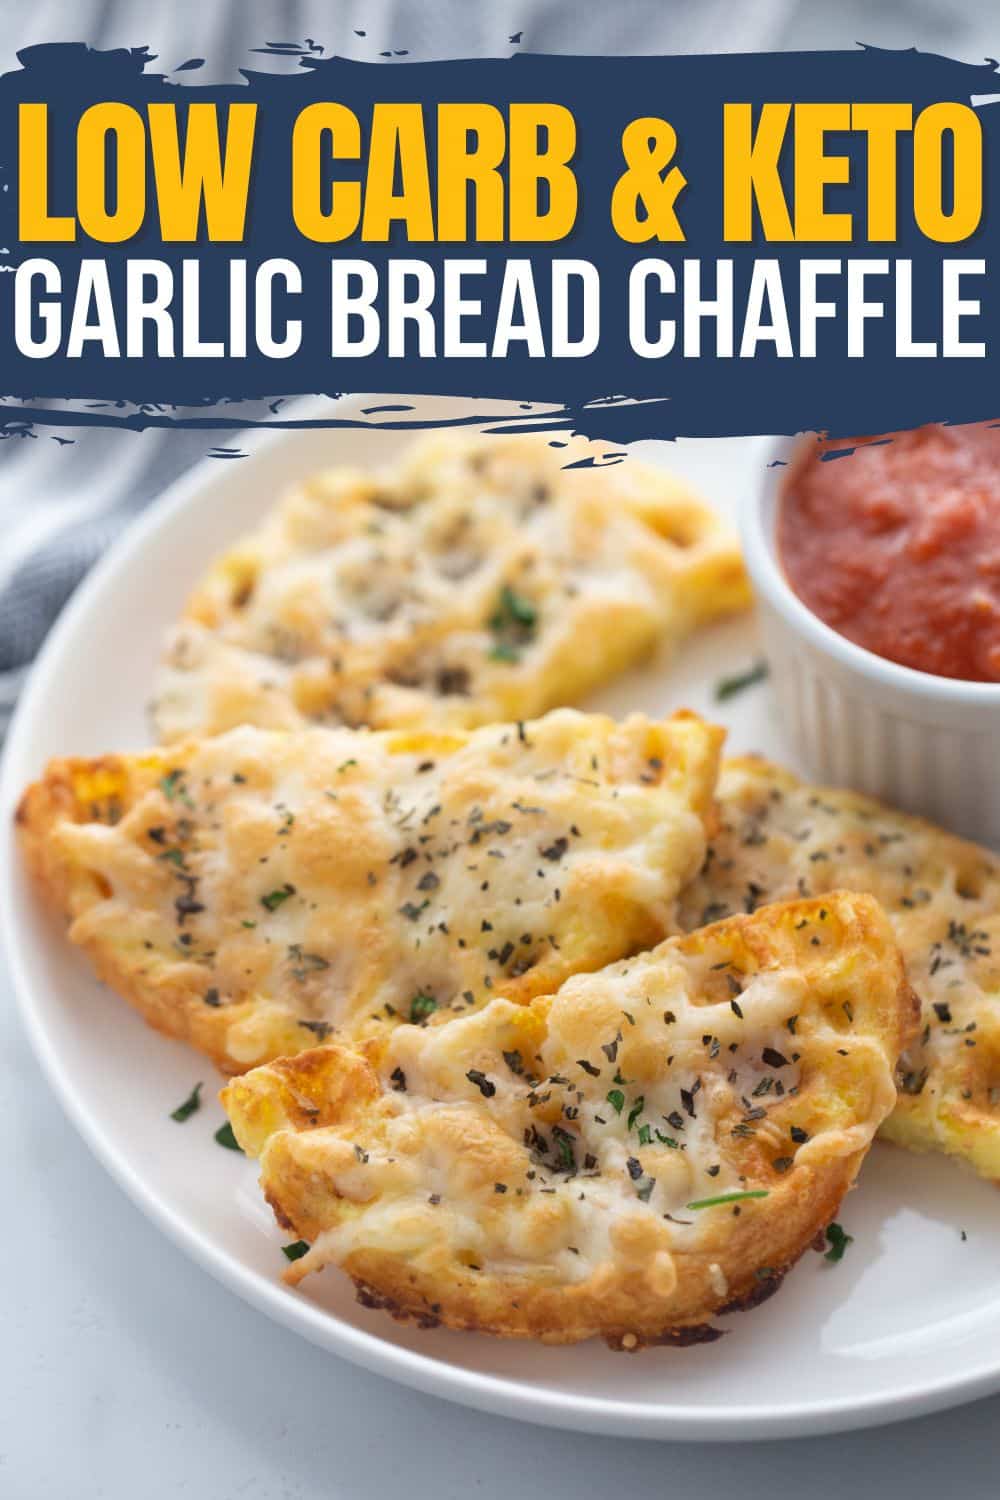 Crispy low carb garlic chaffles sliced open with stretchy melted mozzarella cheese on top and served with marinara sauce for dipping. Keto chaffle bread makes the perfect addition to any Italian meal.